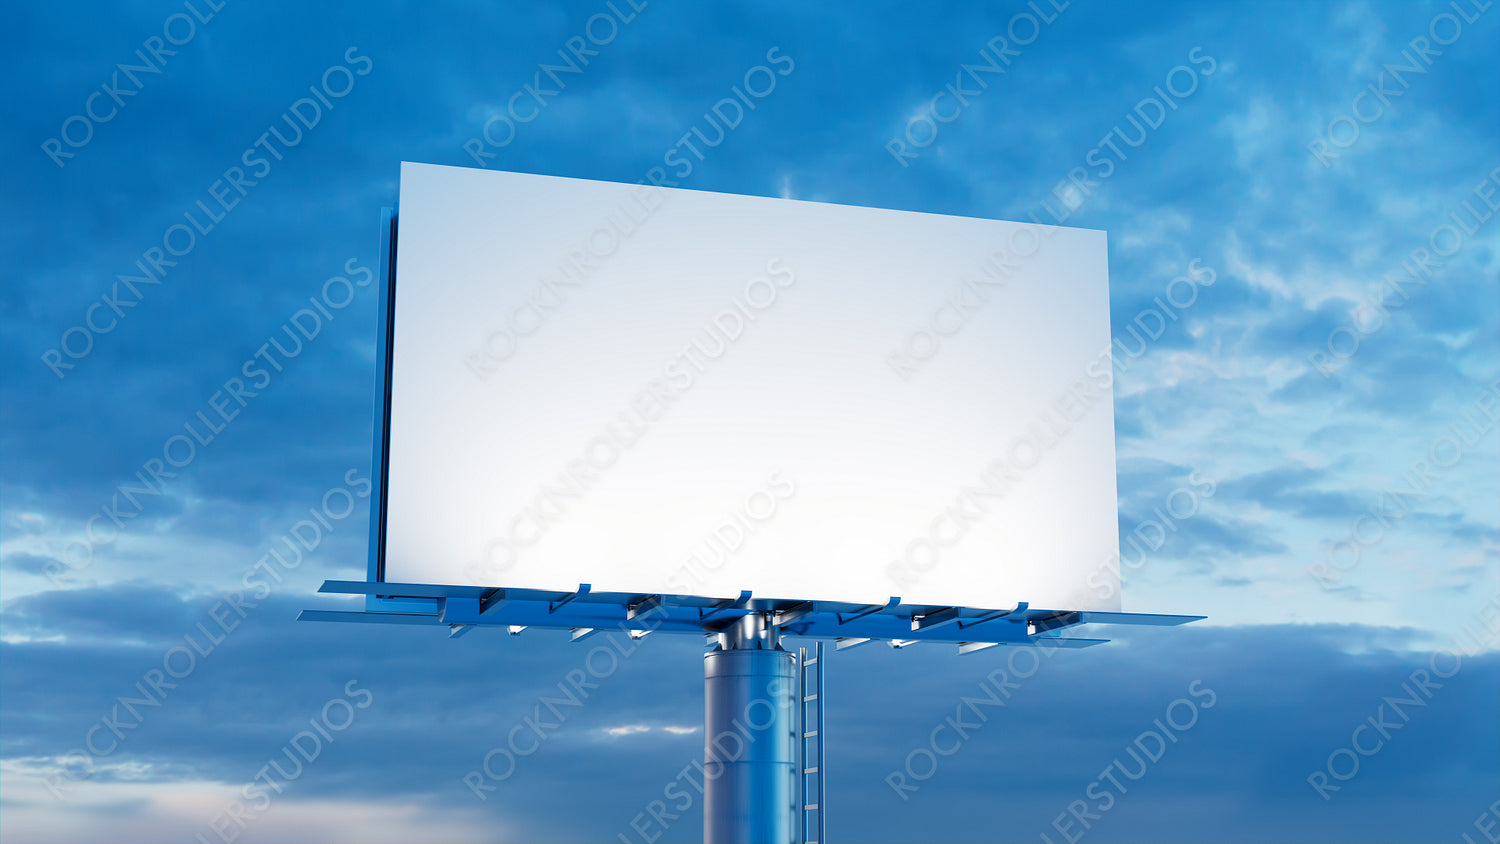 Advertising Billboard. Blank Exterior Sign against a Cloudy Afternoon Sky. Design Template.